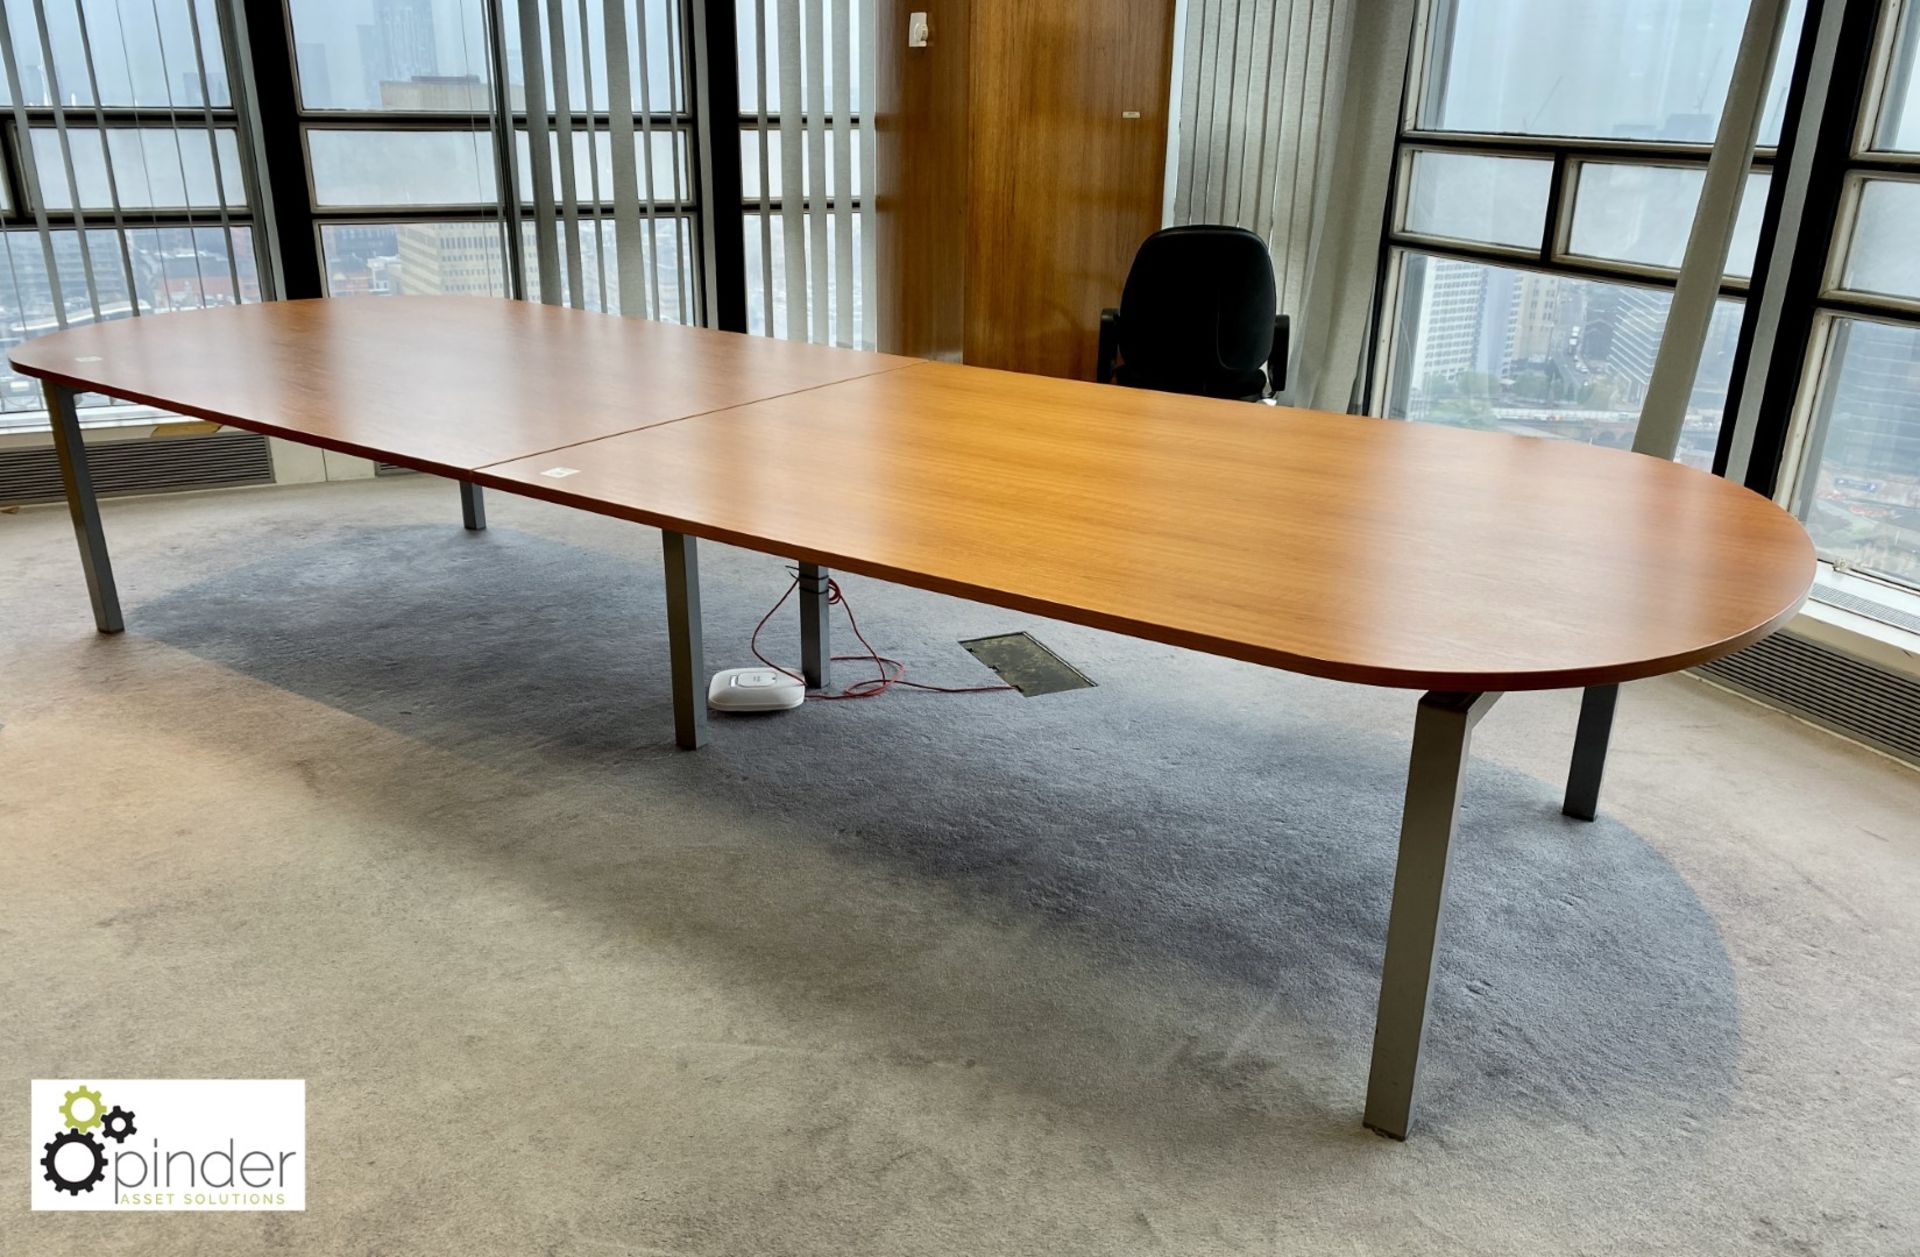 Beech effect D-end 2-section Meeting Table, 4000mm x 1400mm (located in Meeting Room 6 on 23rd